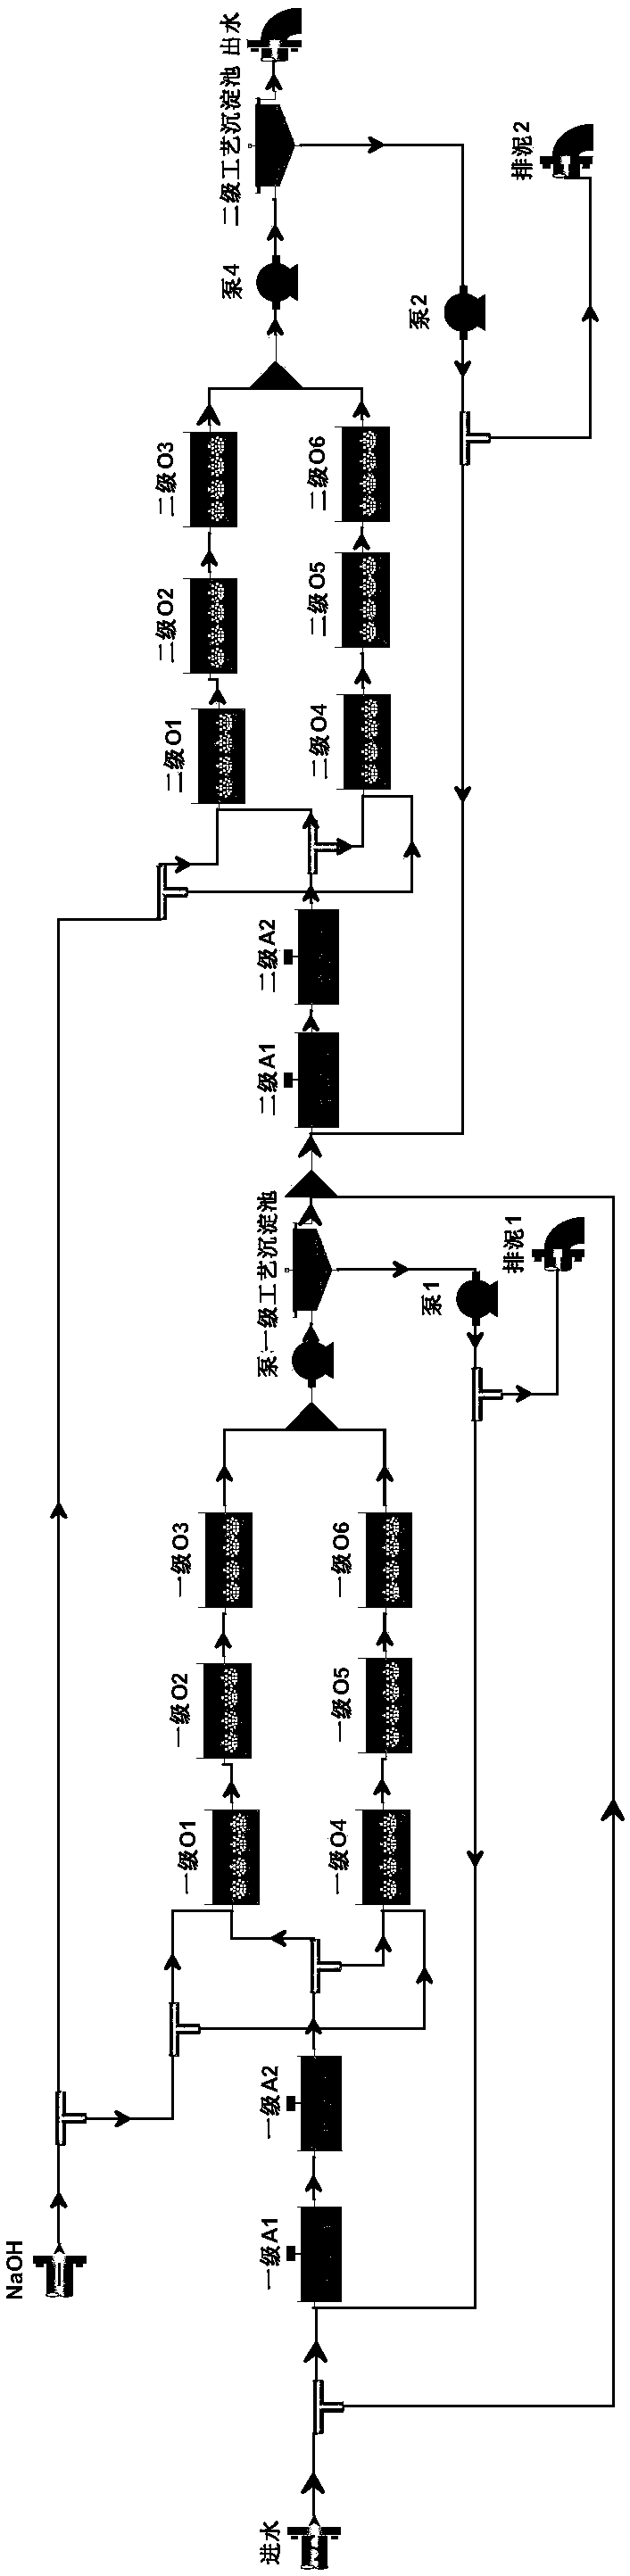 Method for optimizing refinery wastewater biochemical processing unit based on software simulation